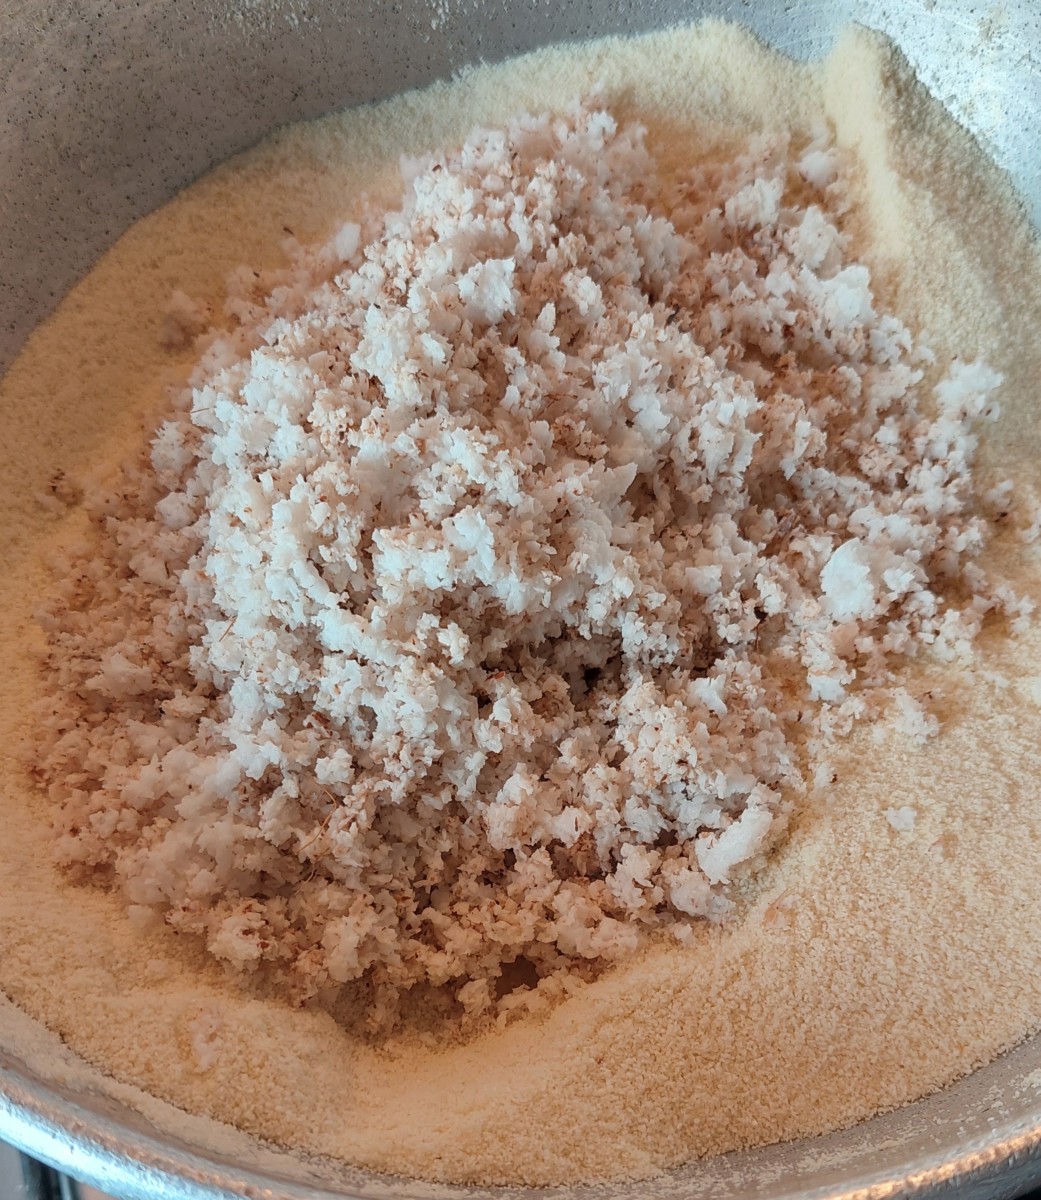 Add 1 cup of grated coconut.